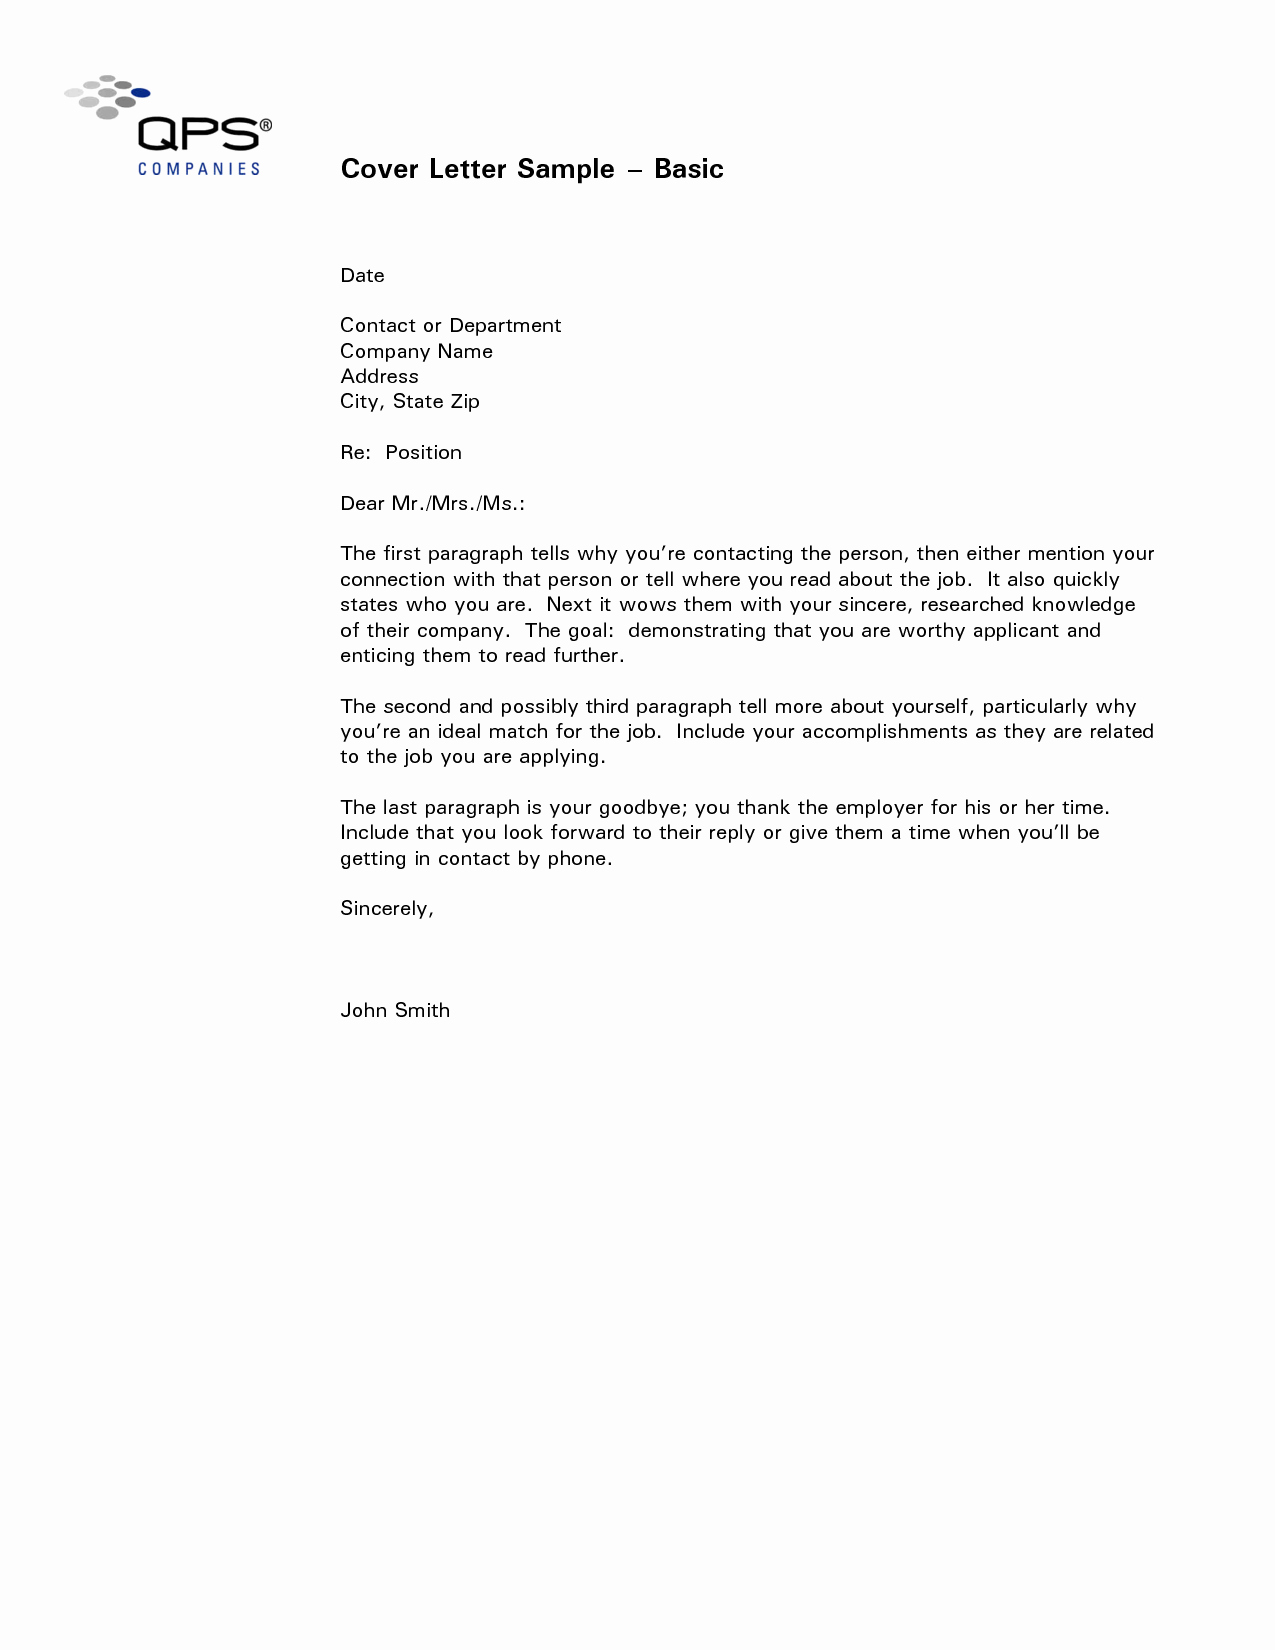 Simple Resume Cover Letter Template Beautiful Basic Cover Letter